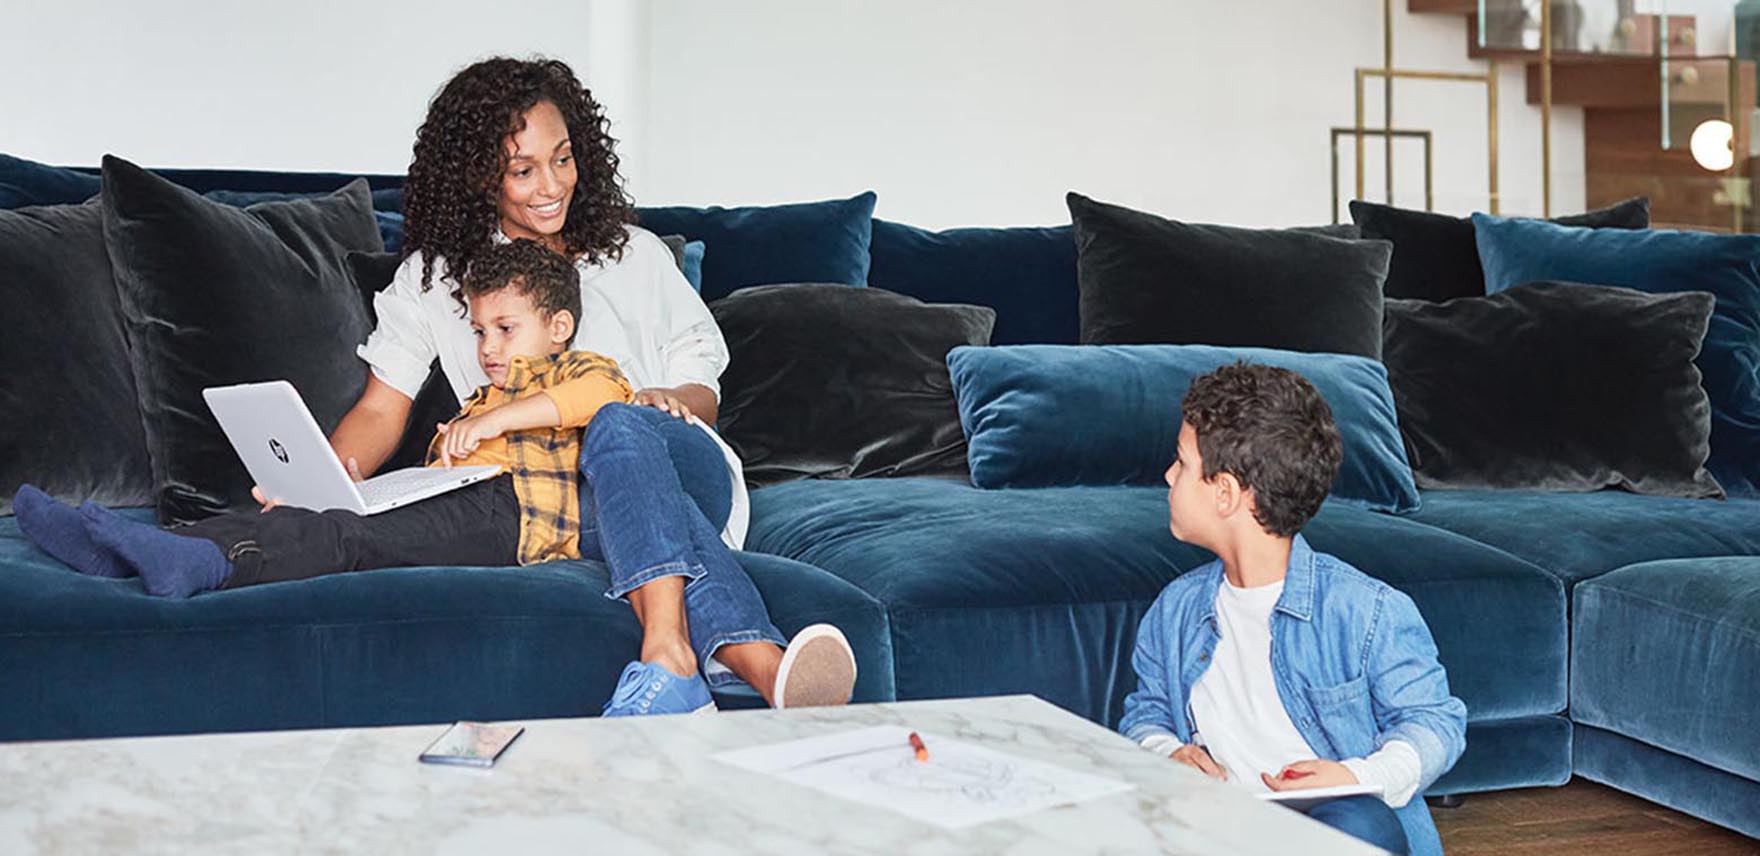 Woman sitting on a couch with her two children and laptop